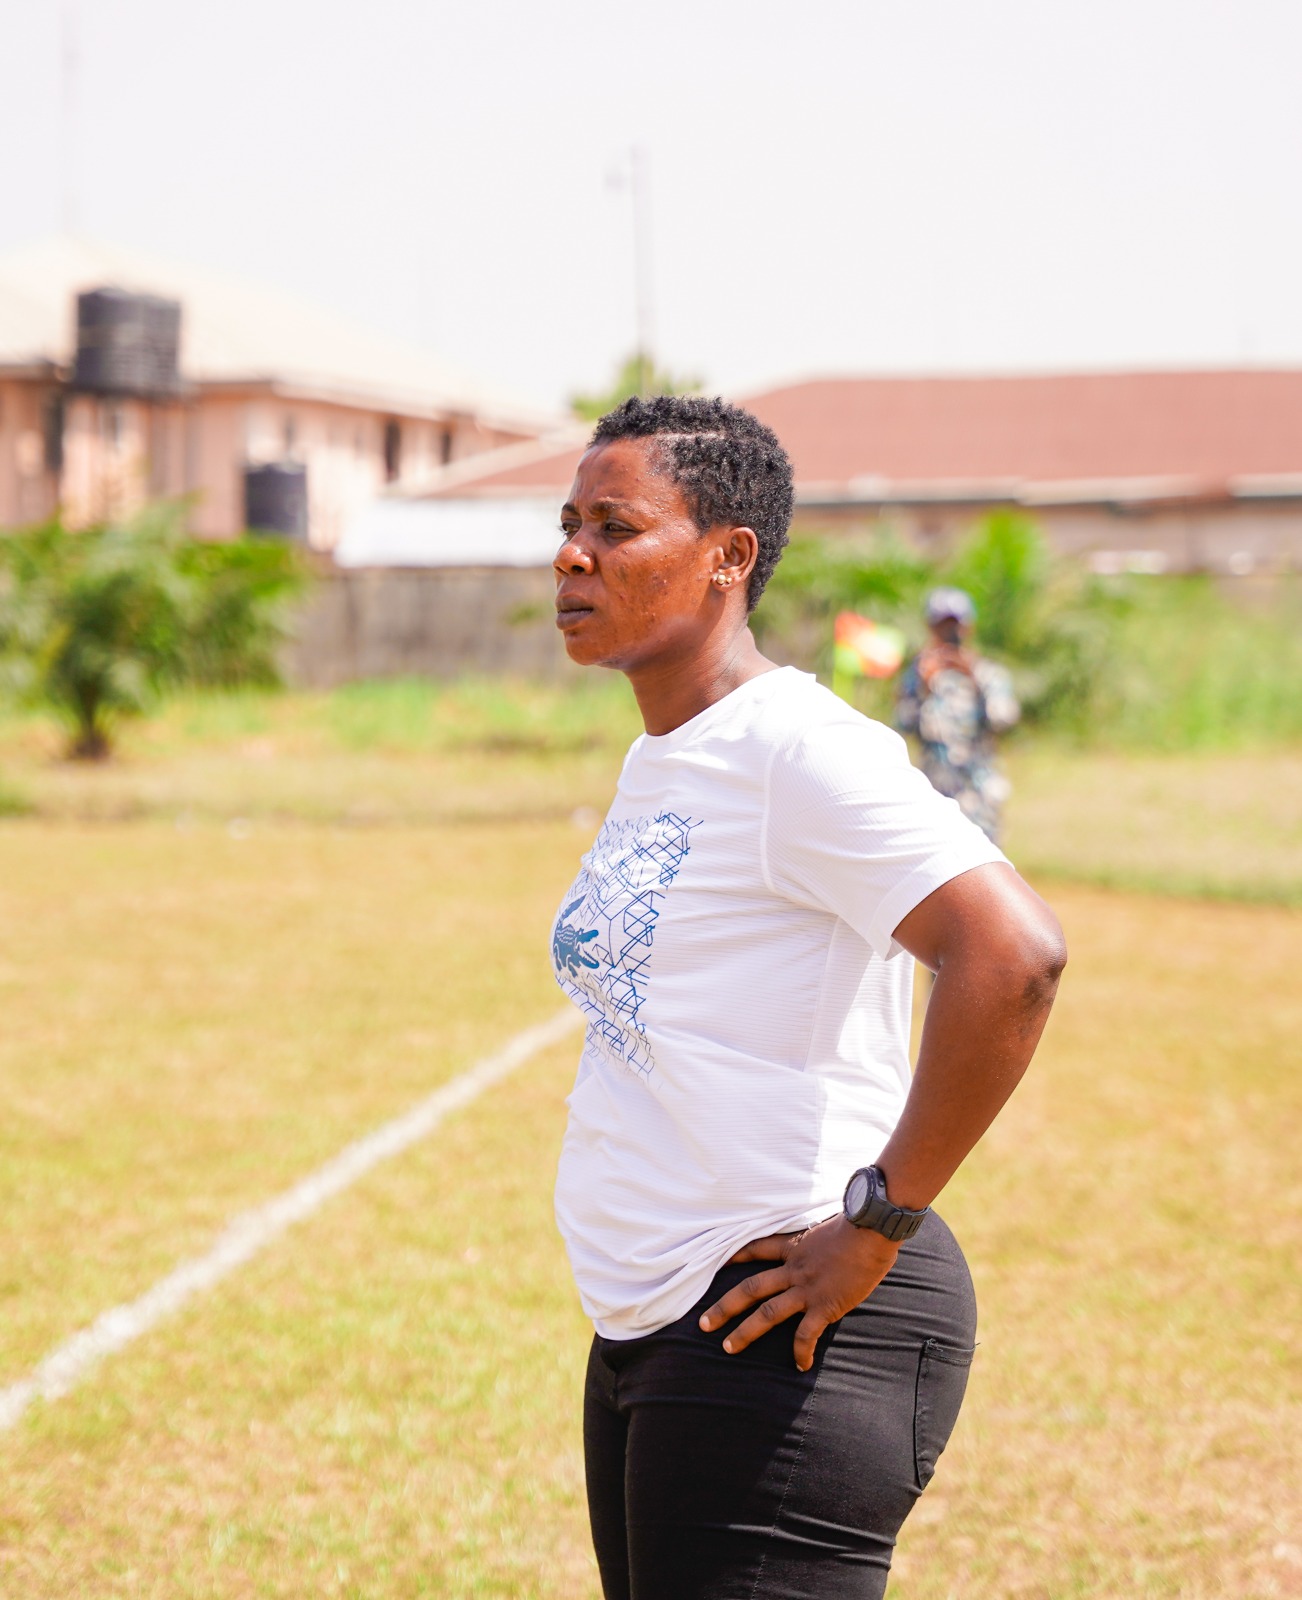 Fortress Ladies Face Imo Strikers Scoring 'Fury' As Semi Final Matches Take Center Stage In 2023 Ifeanyi Chiejine Memorial Cup Championship